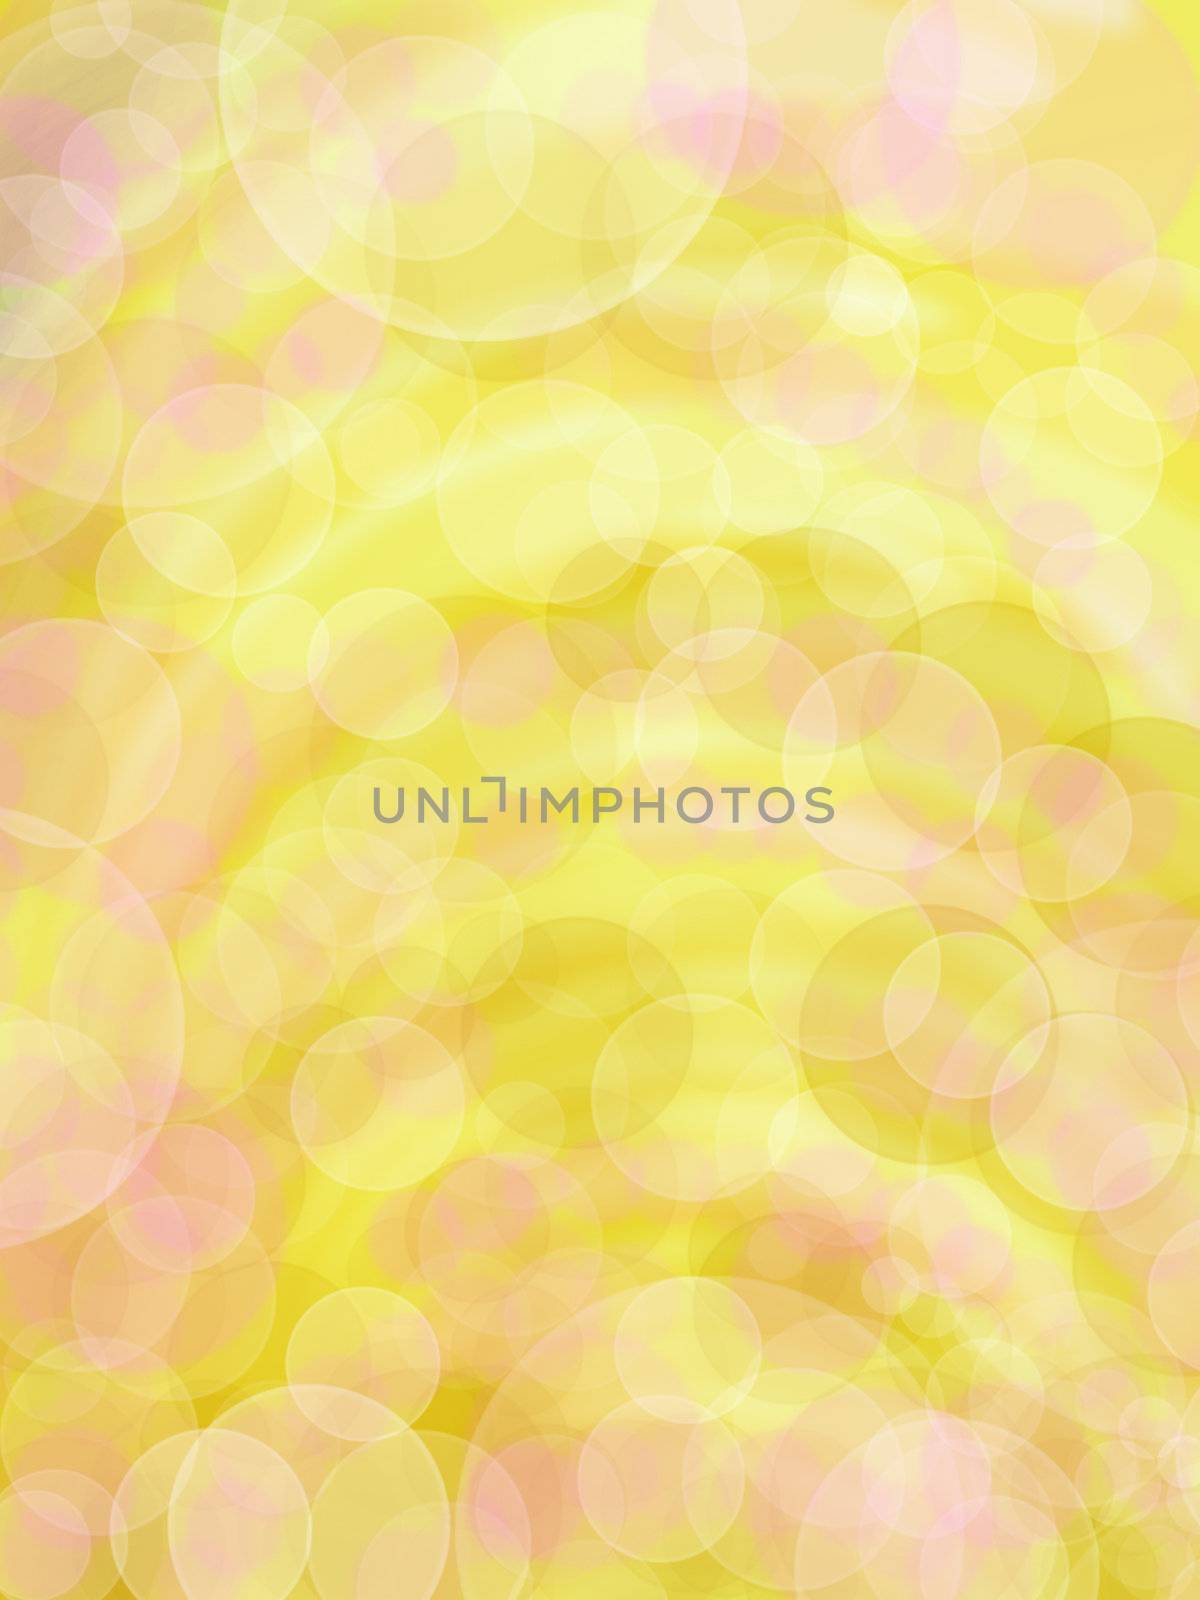 Abstract background of circles in different shades of yellow